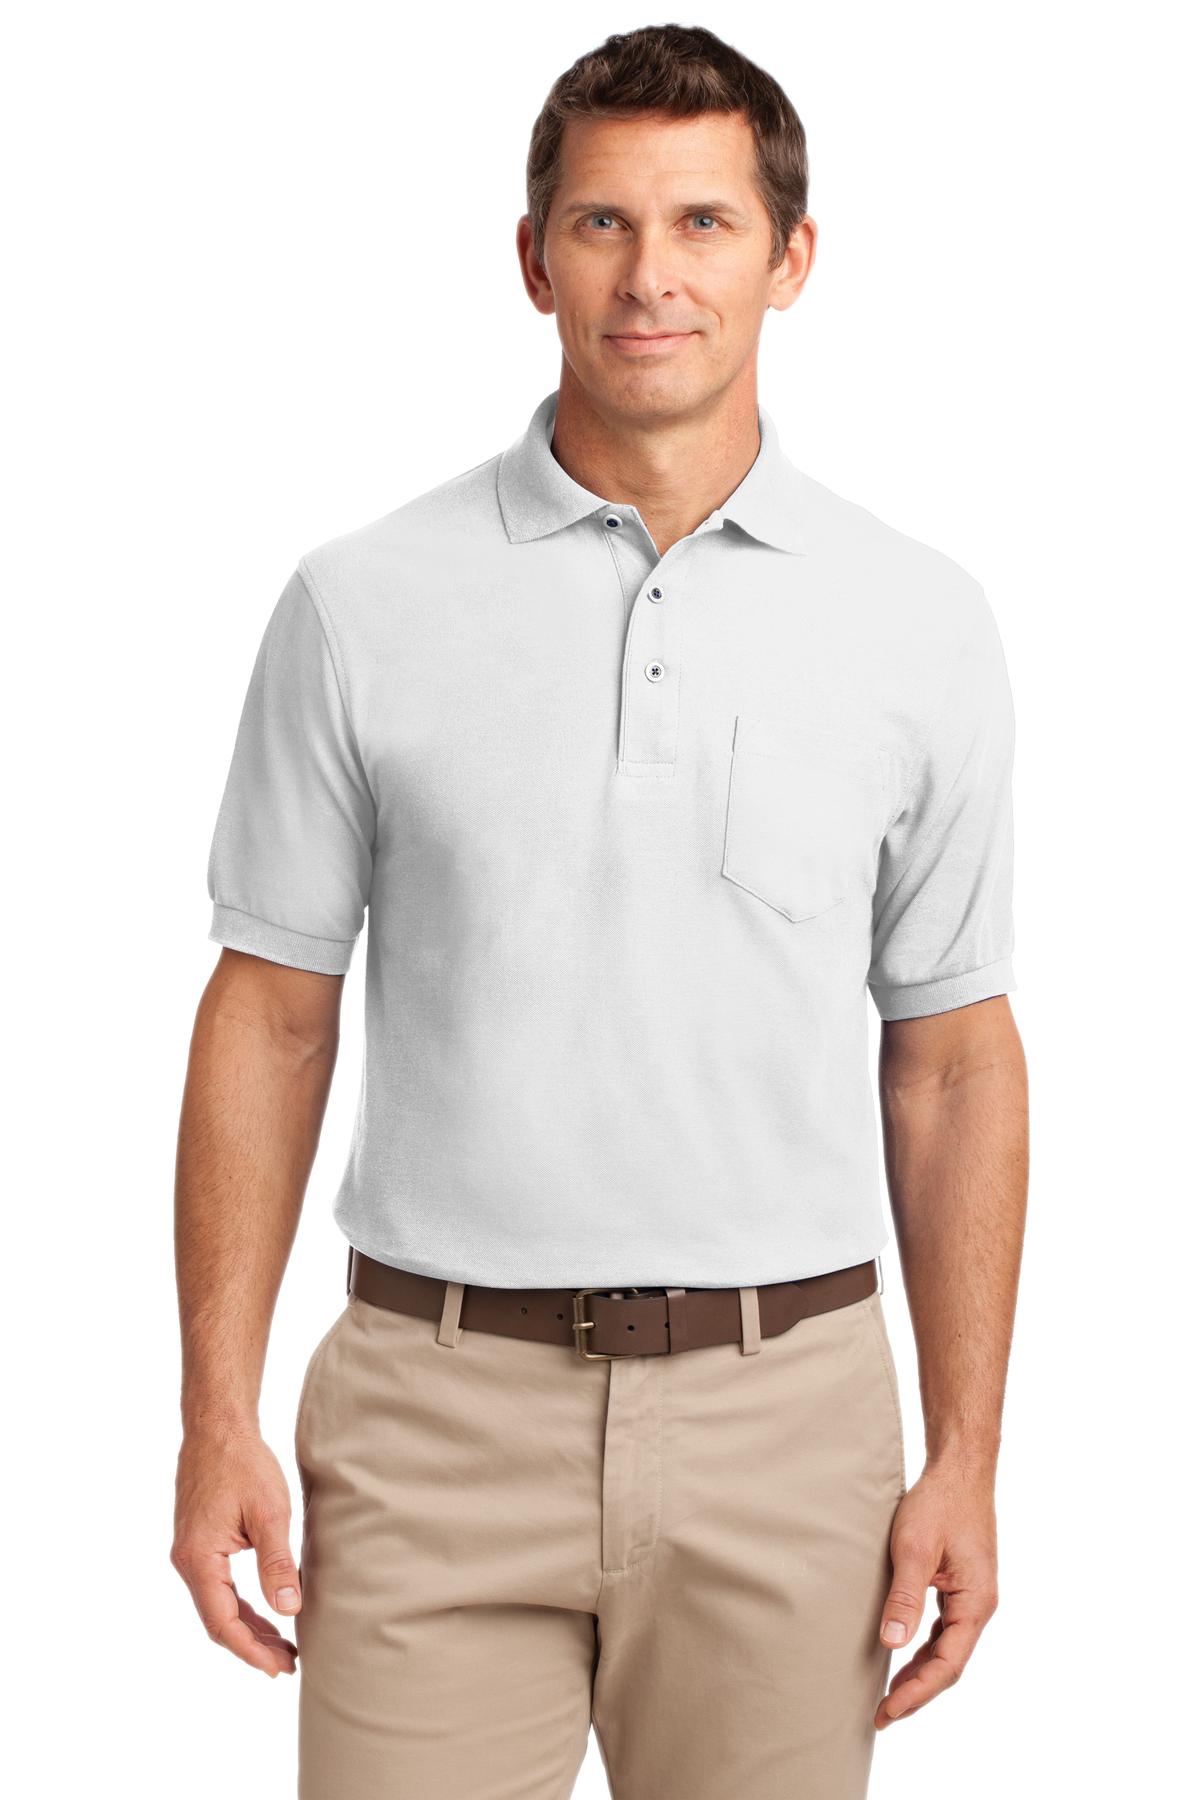 Morgan Horse AssociationPort Authority® Silk Touch™ Polo with Pocket.  K500P